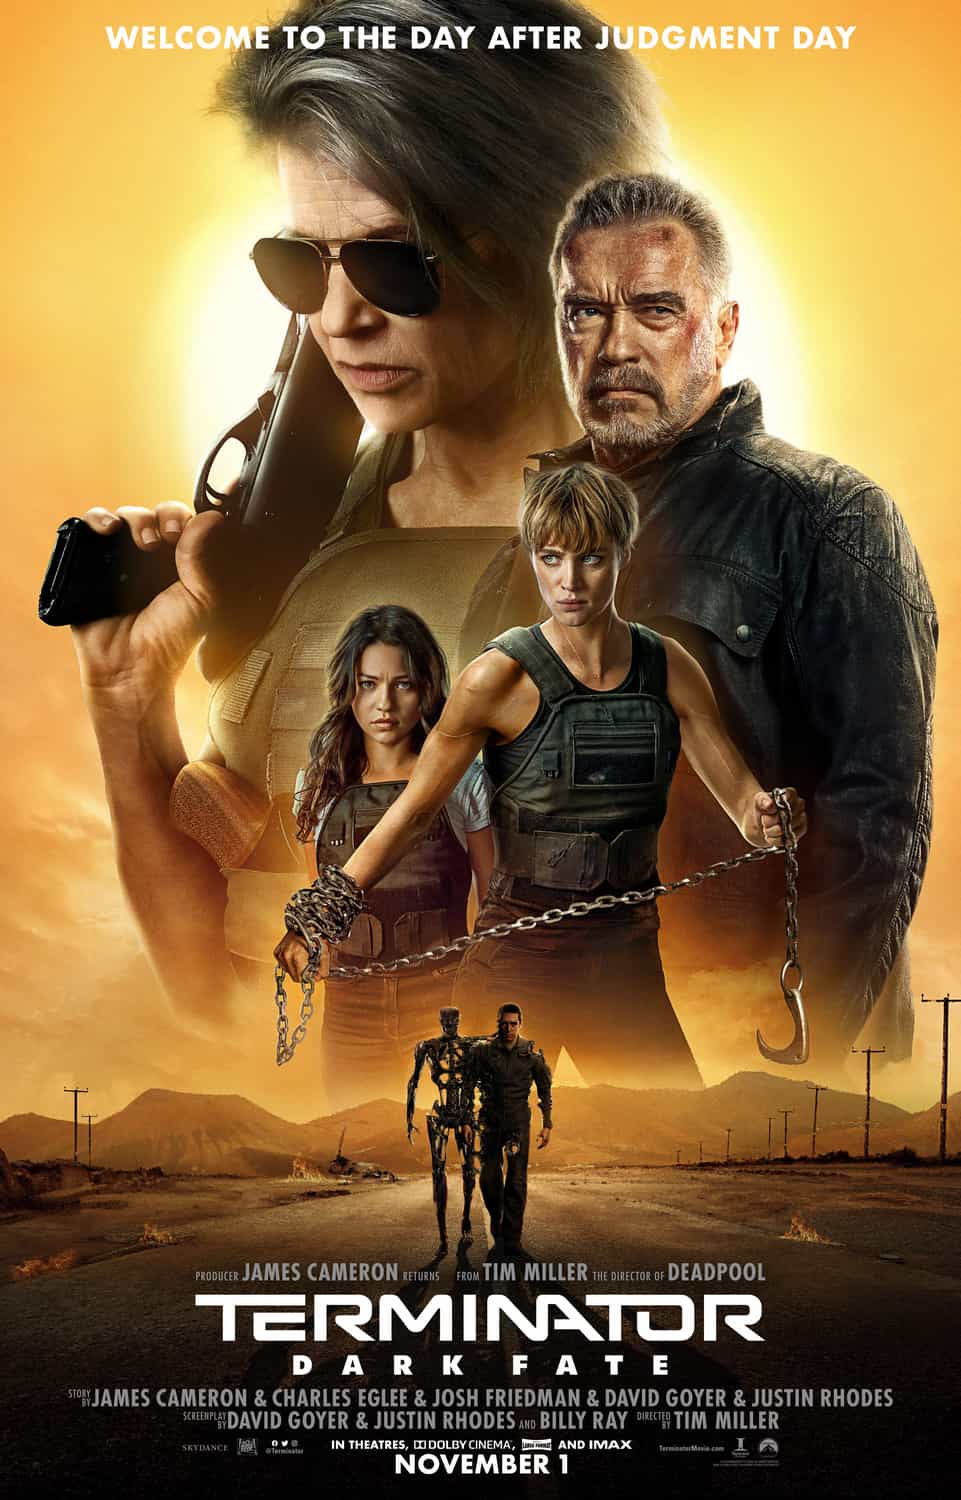 Full trailer for Terminator: Dark Fate lands feature the full cast in action, including Schwarzenegger